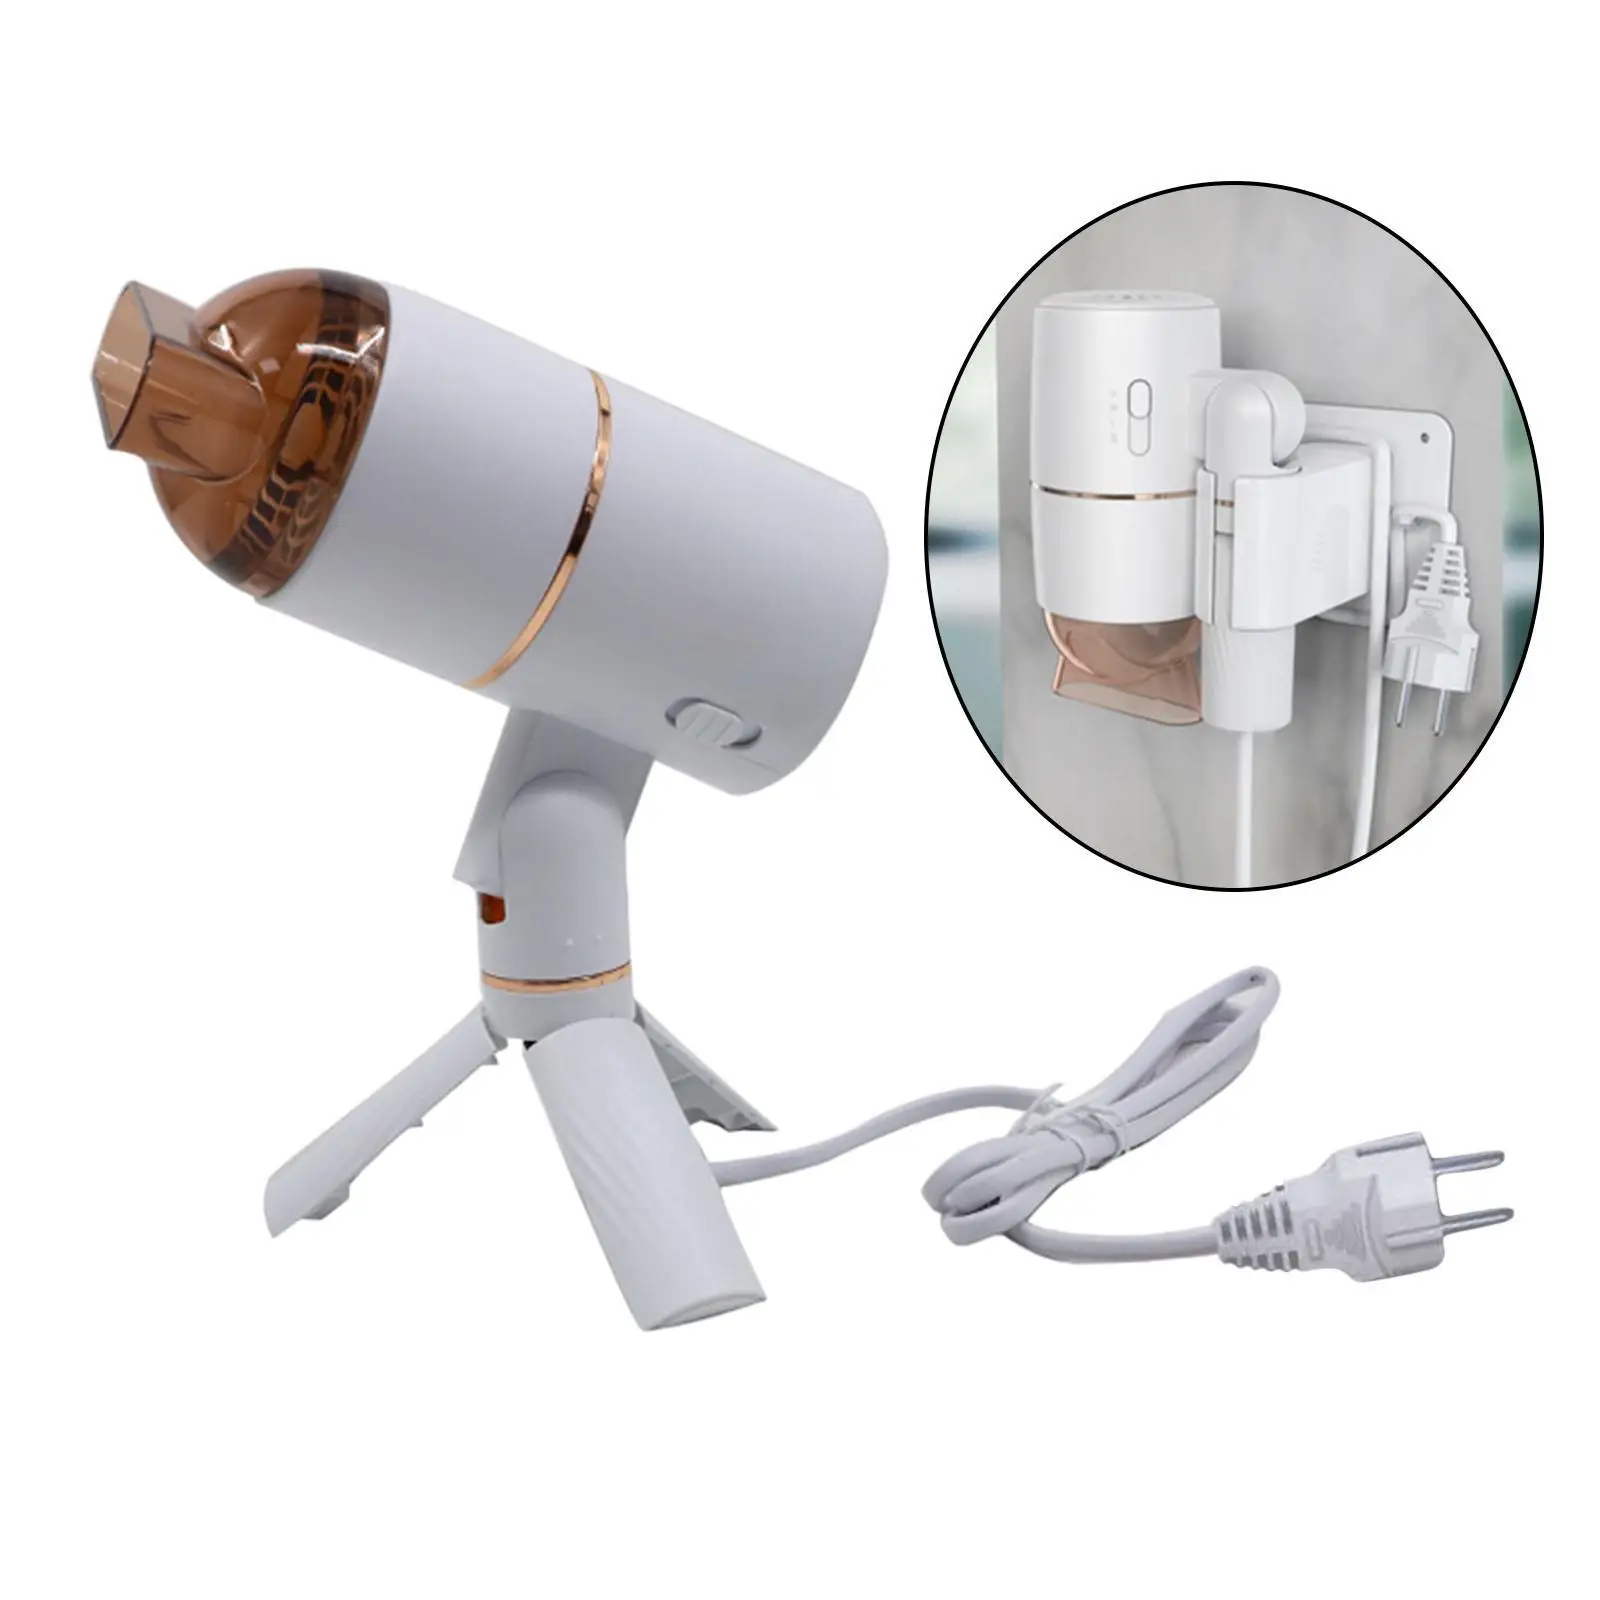 Ionic Salon Hair Dryer Lazy Dryer Beauty Accessories Supplies for Women Men for Business Dormitory Bathroom EU